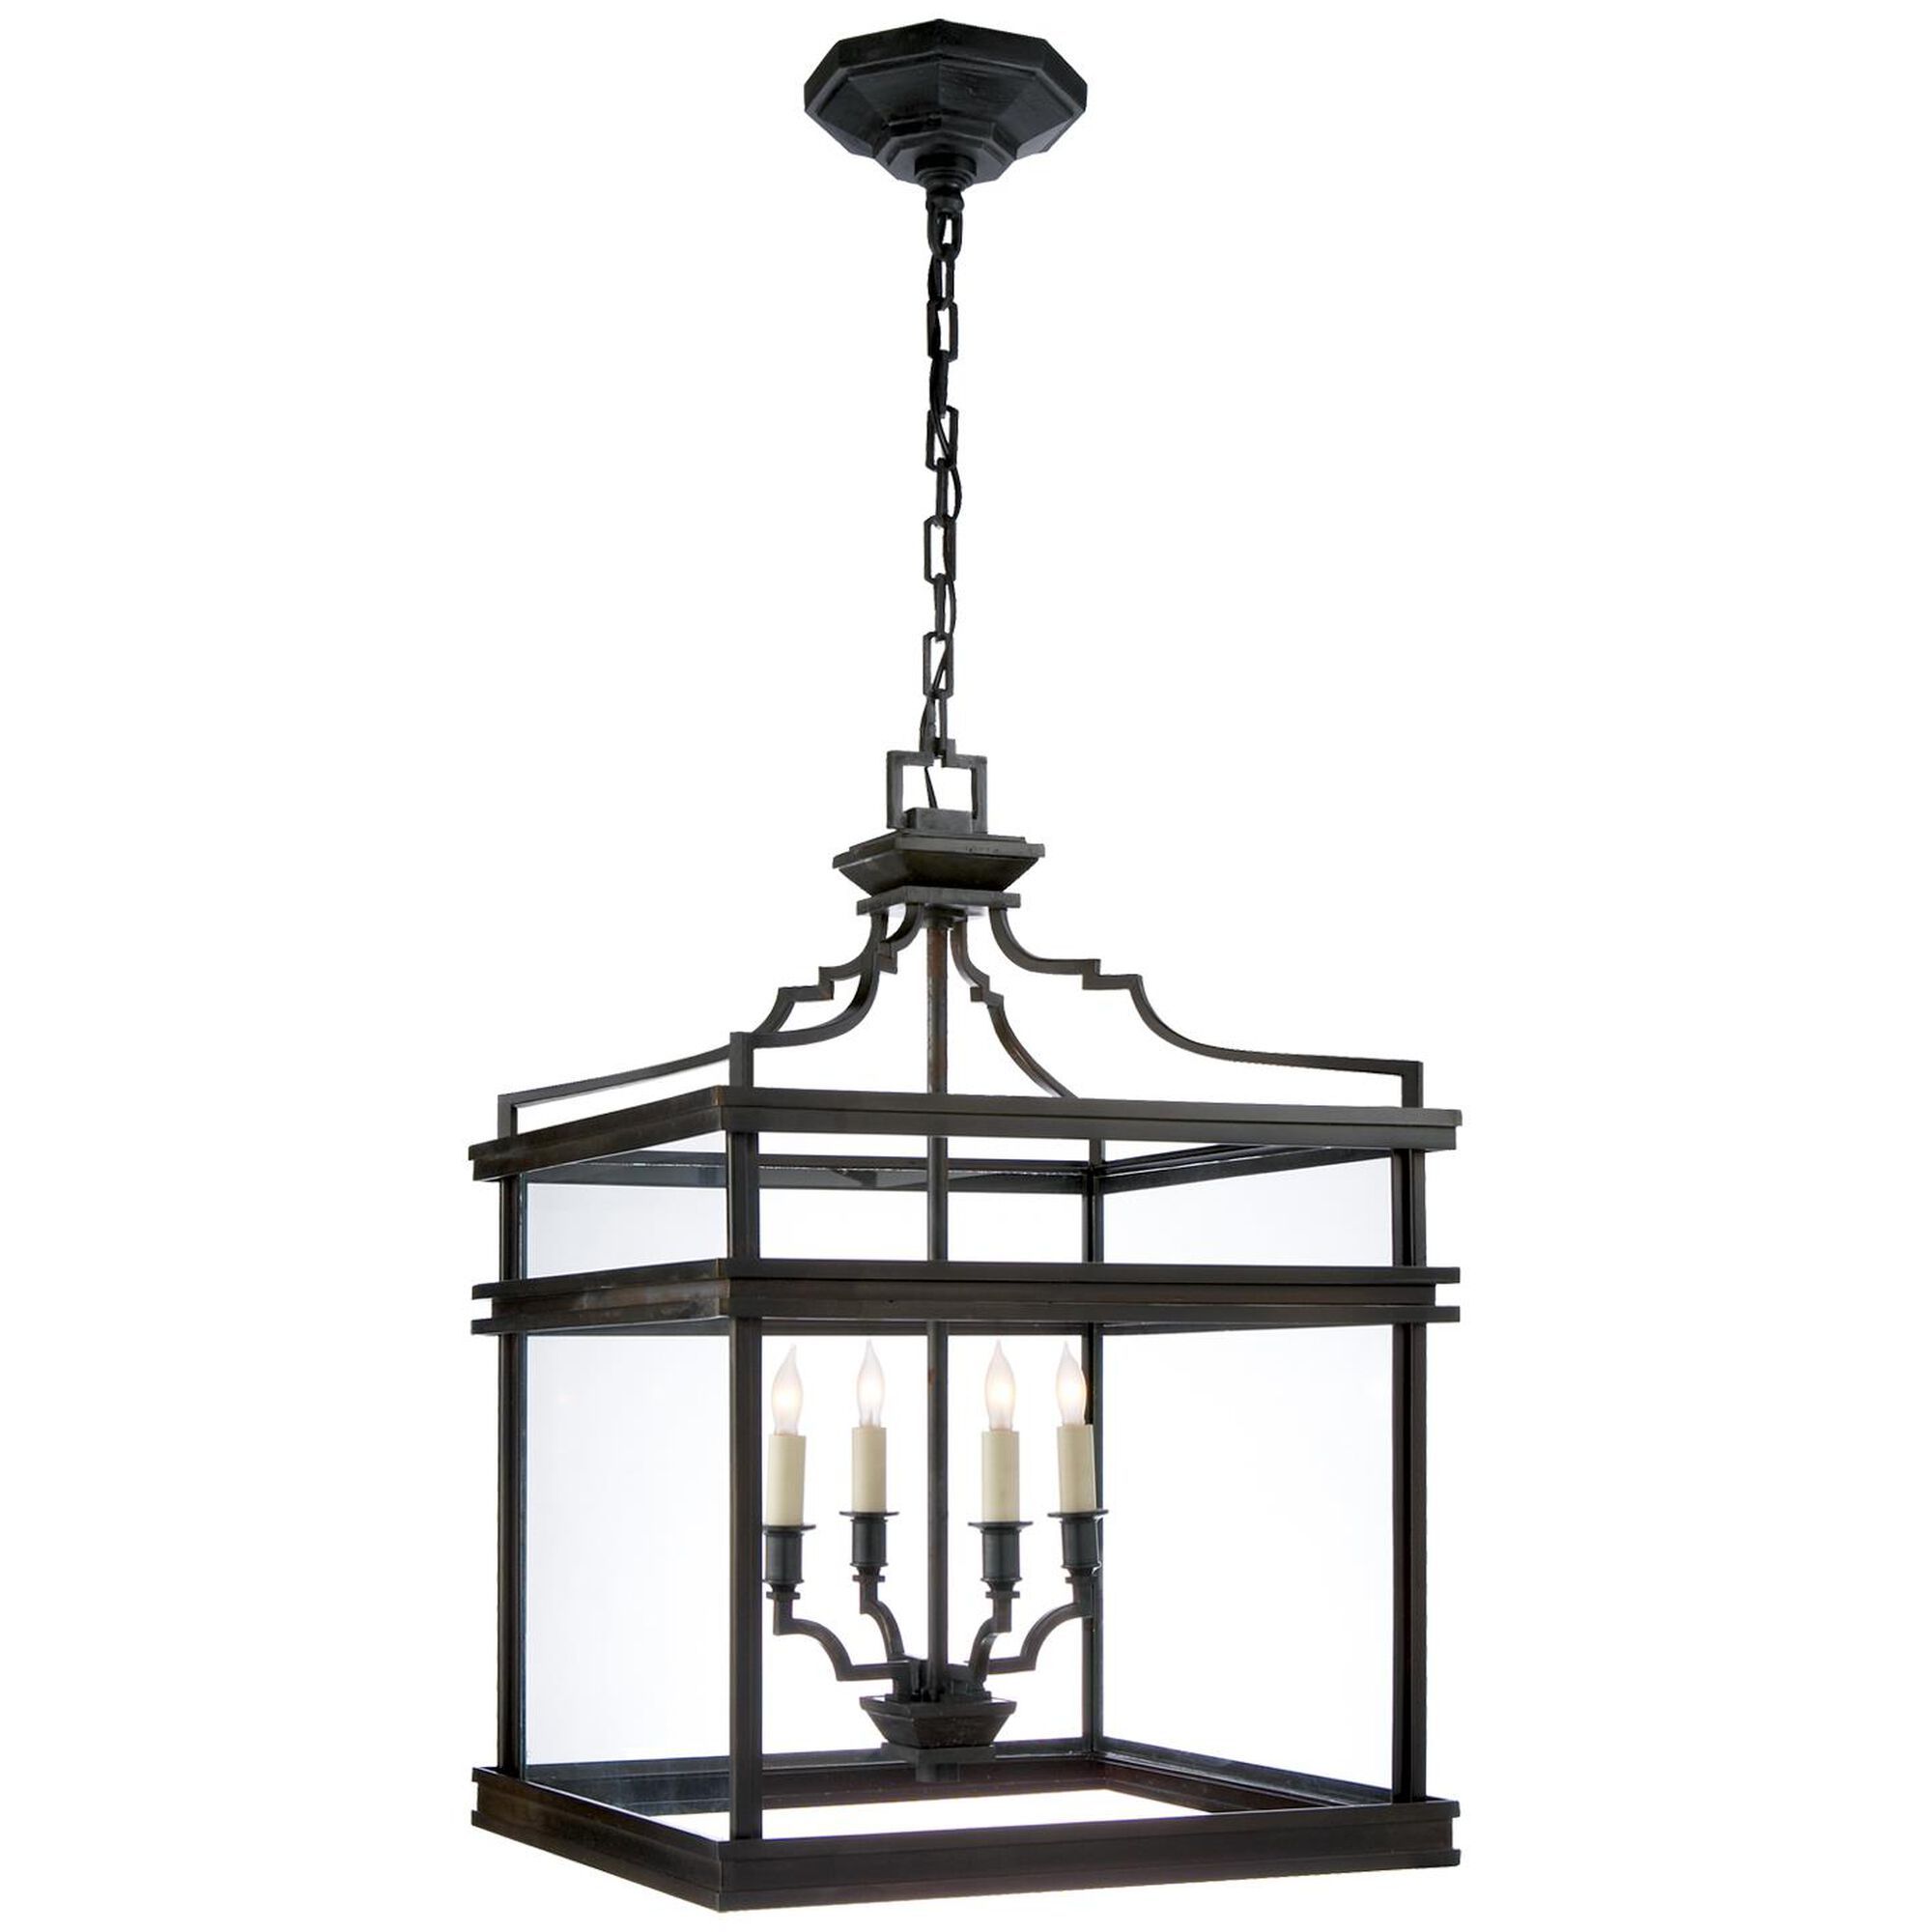 Chapman & Myers Mykonos 17 Inch Cage Pendant by Visual Comfort Signature Collection | 1800 Lighting